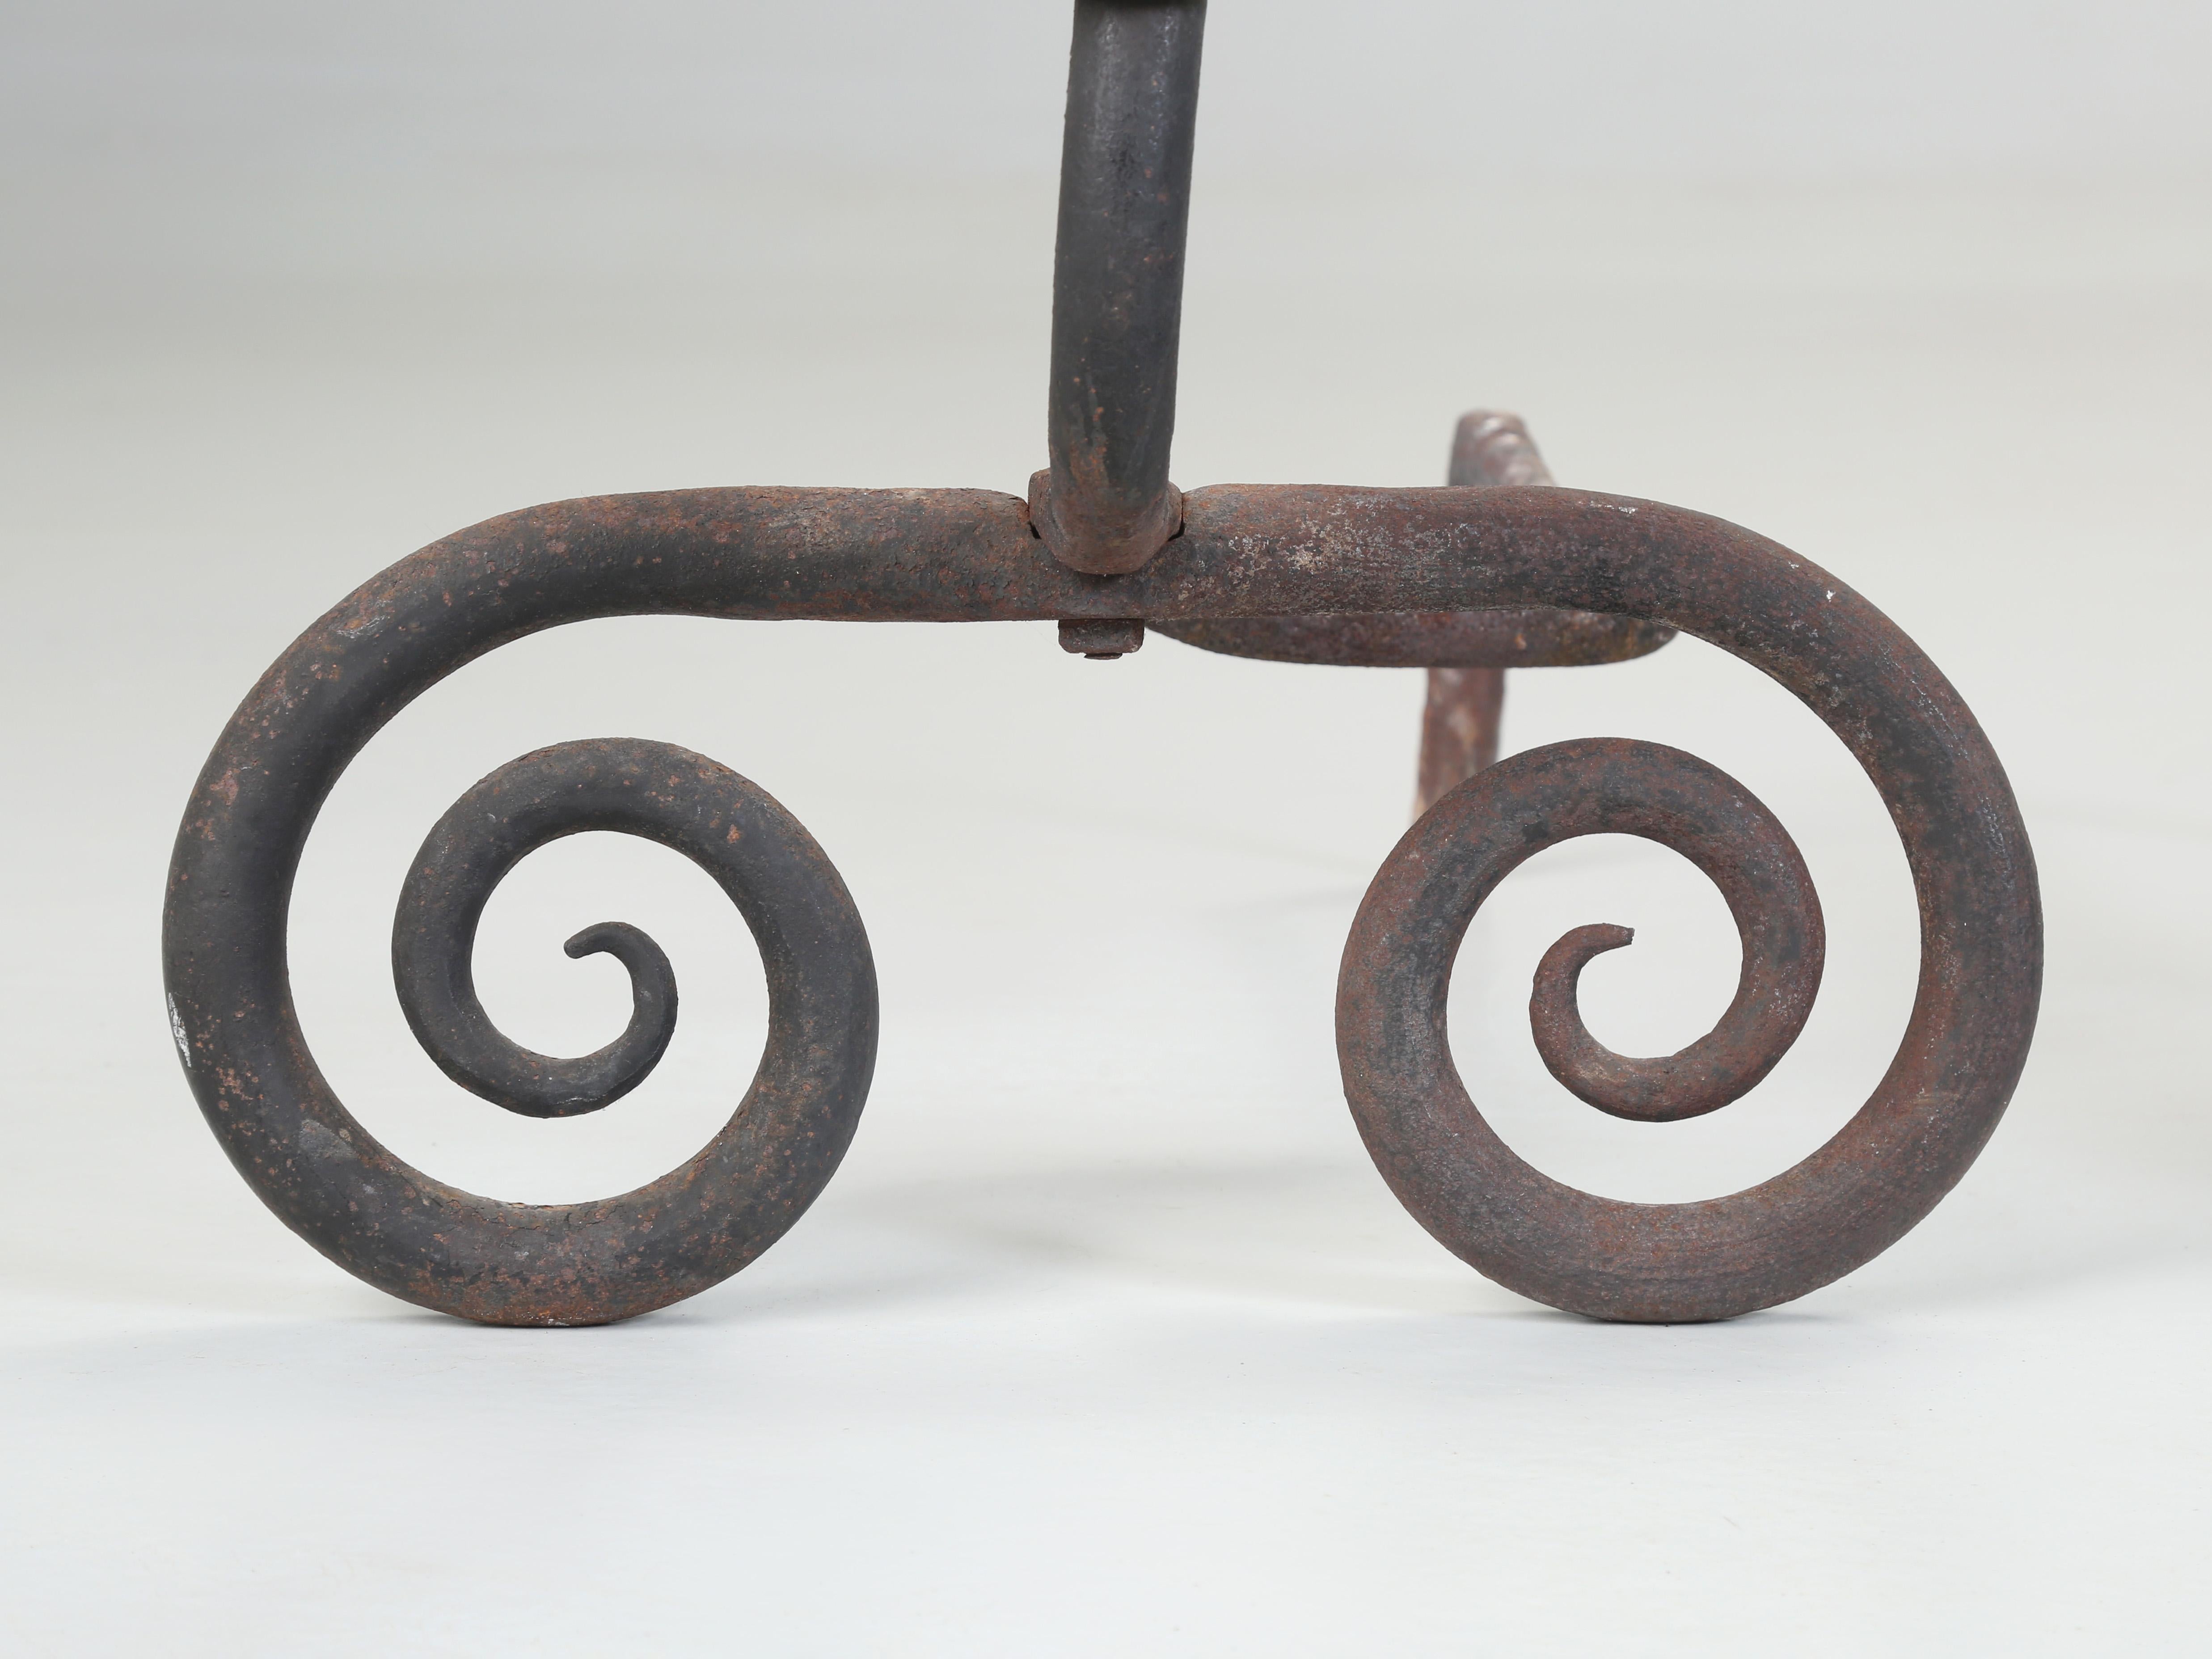 Wrought Iron Fireplace Andirons. Modernist Curled Form with Sphere Top c1940's For Sale 5